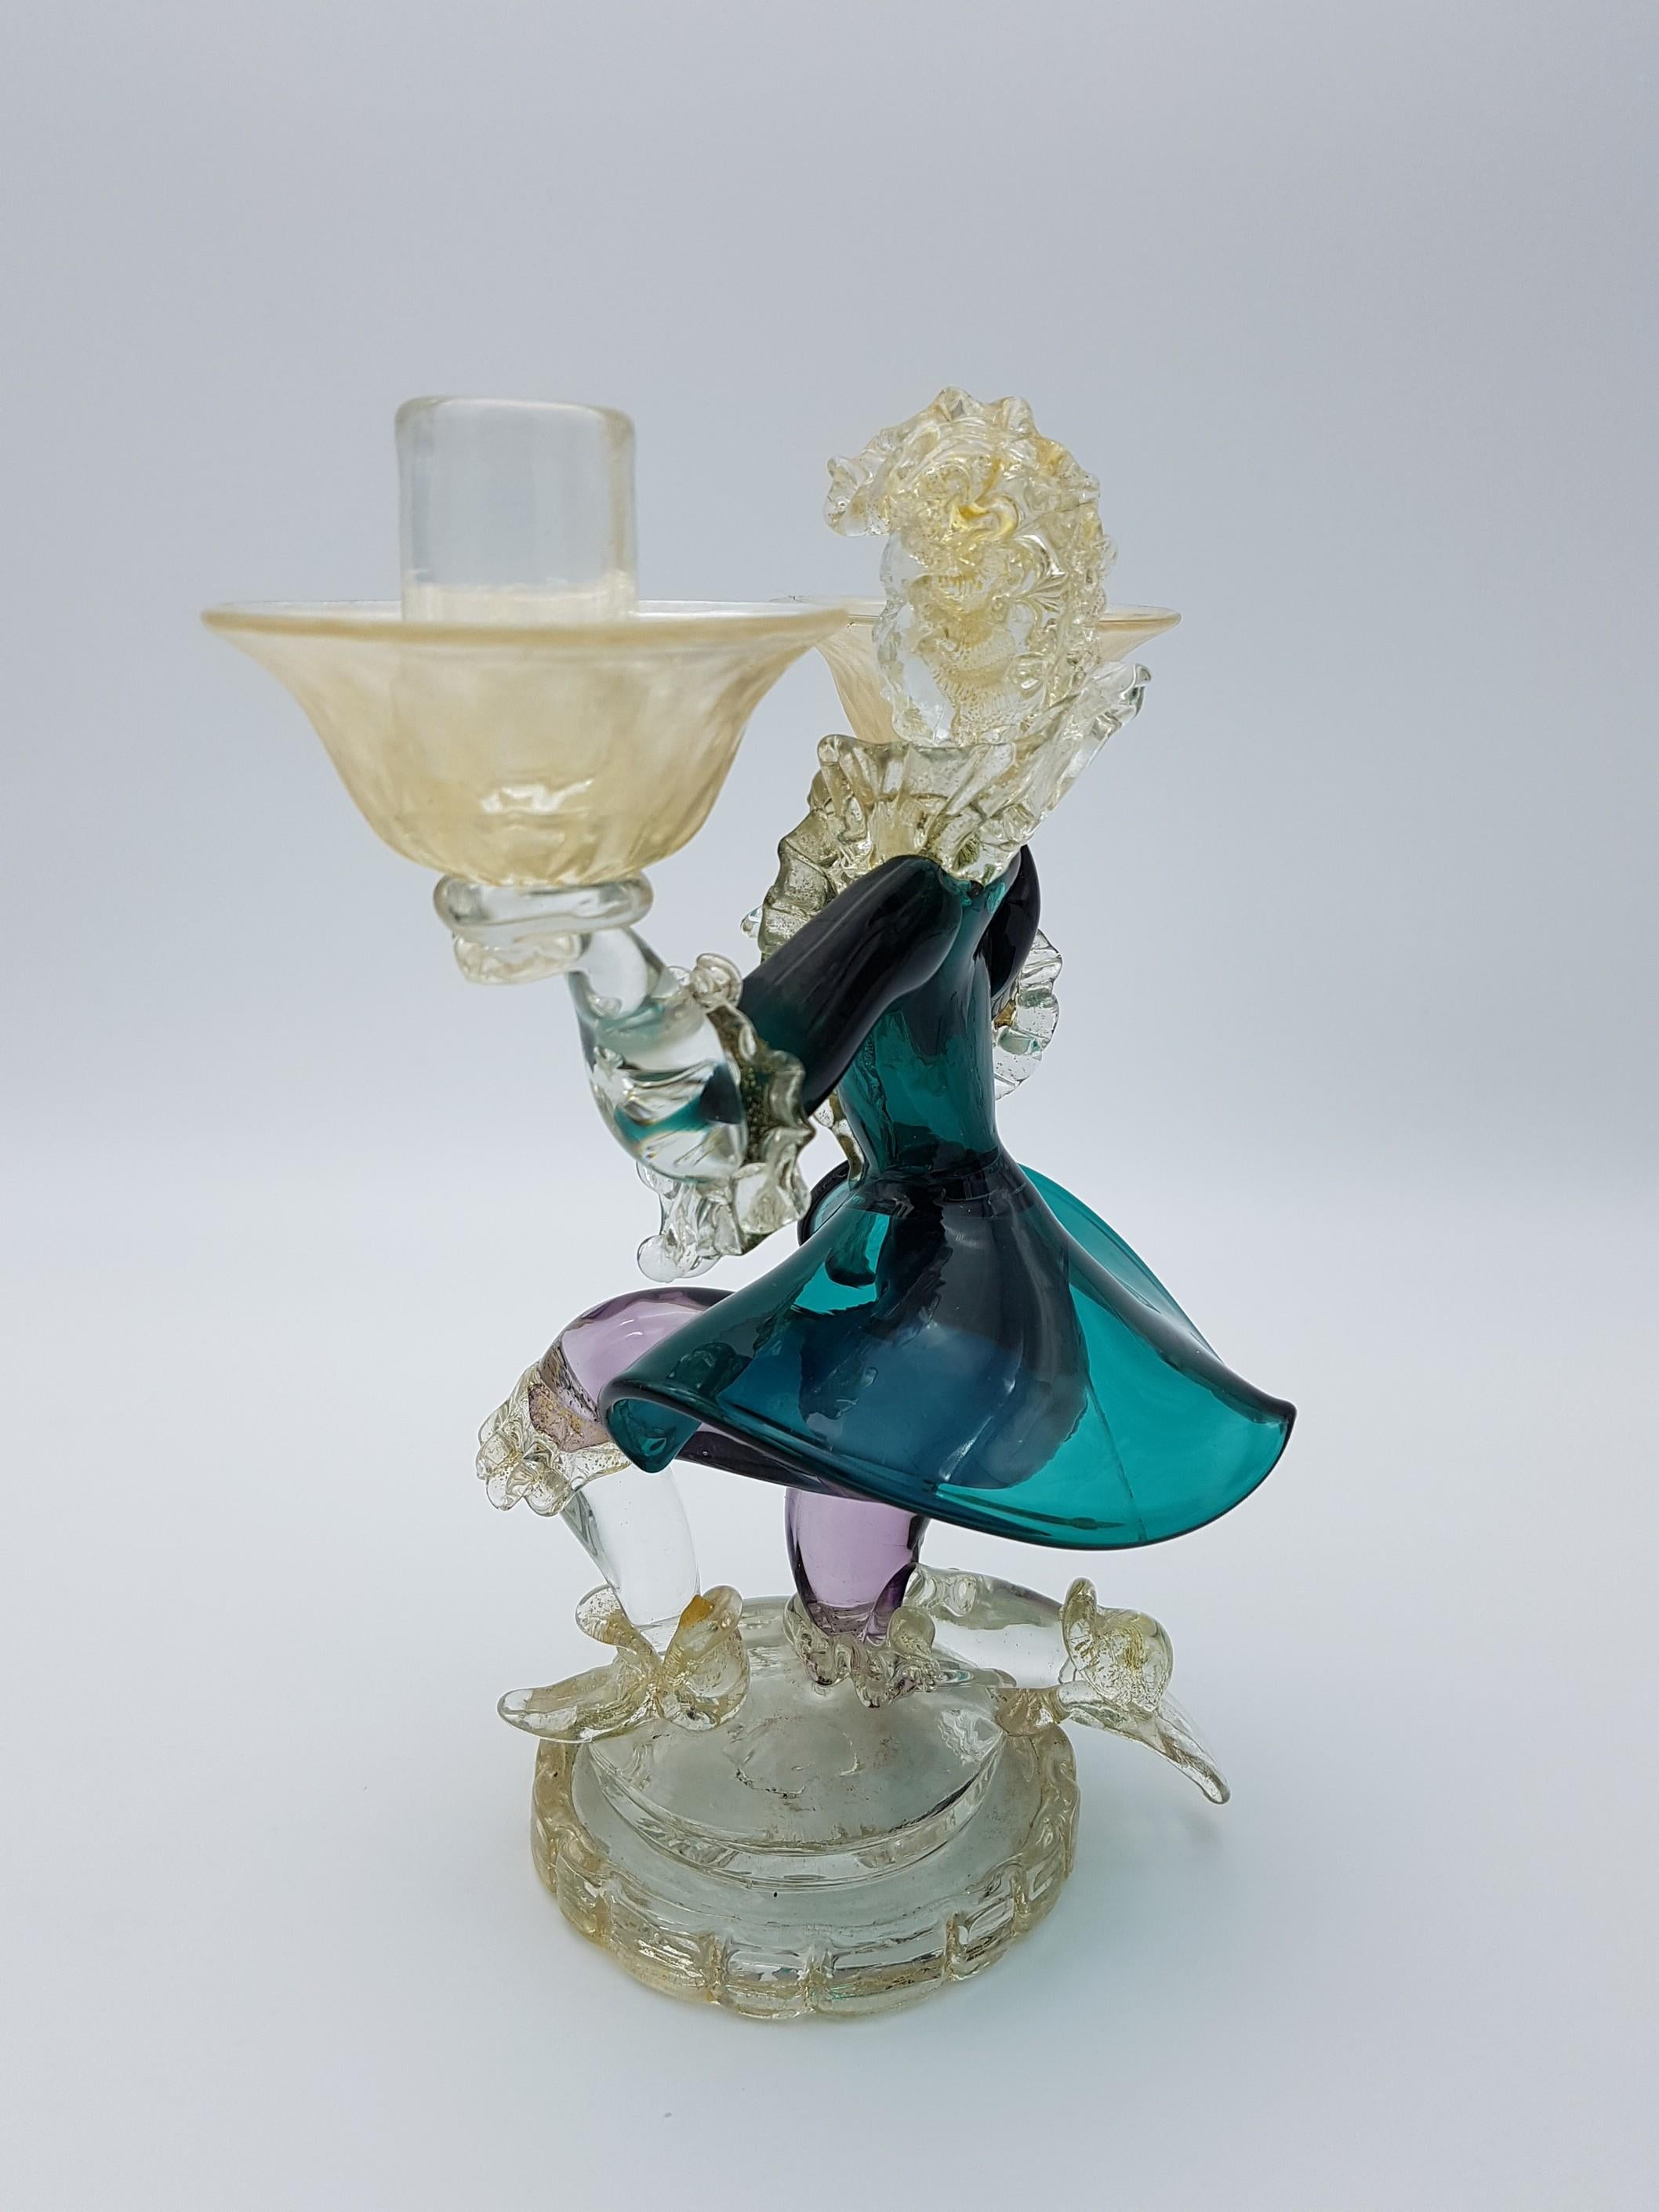 This vintage Murano glass figurine was hand-made by Gino Cenedese e Figlio in the early 1970s and portrays a Venetian nobleman from the 1700s, knealed and carrying on his hands two candleholders. While the 1700s represented a period of decadence and